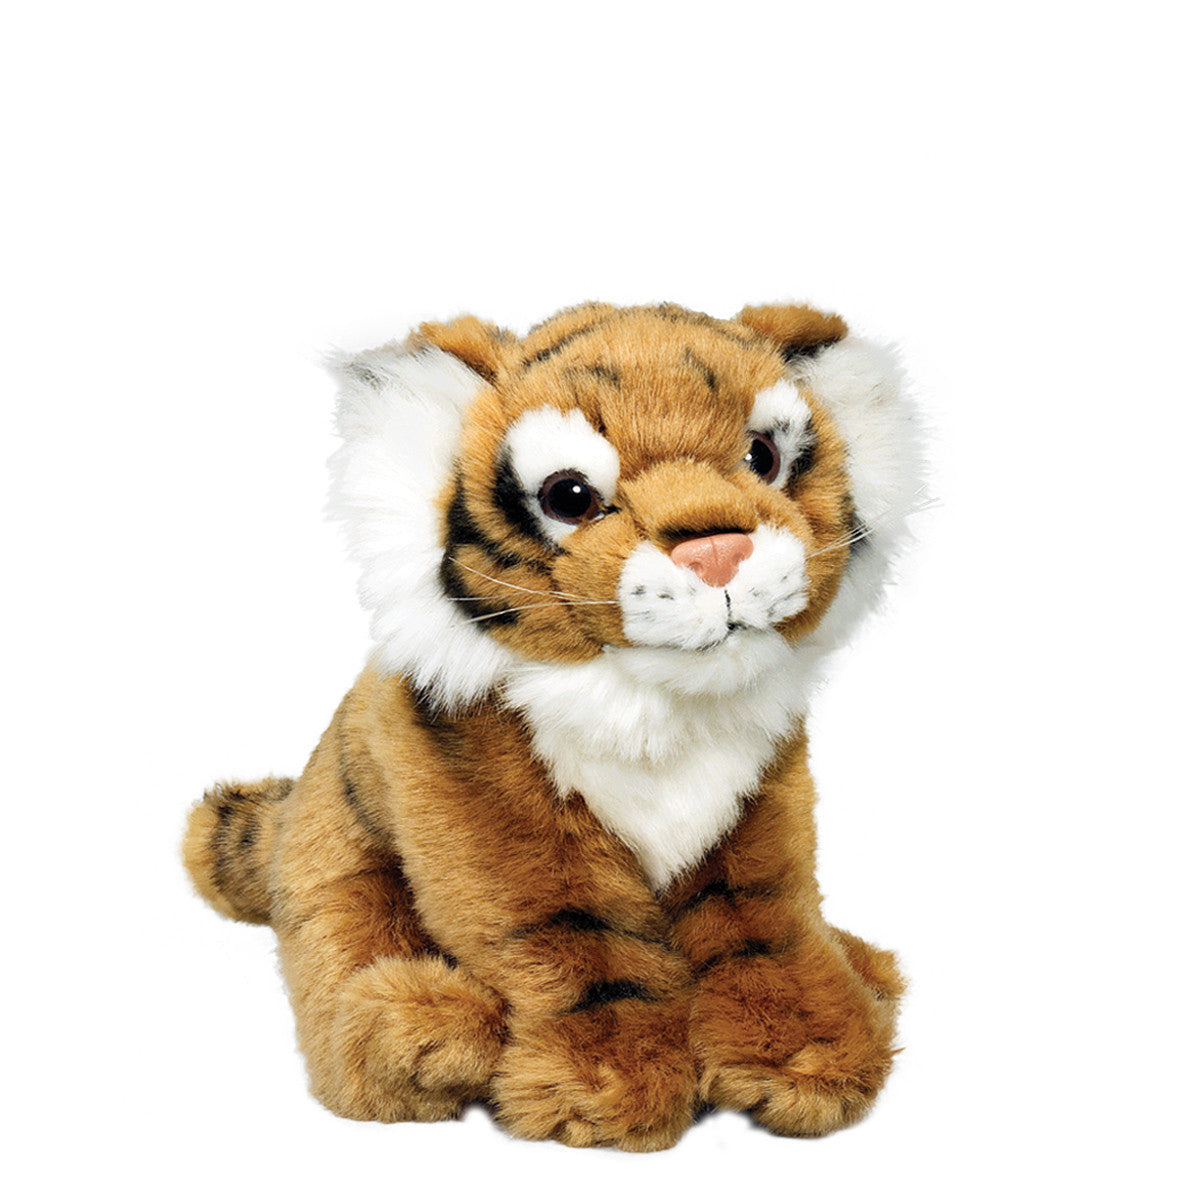 A photo of the tiger plush toy